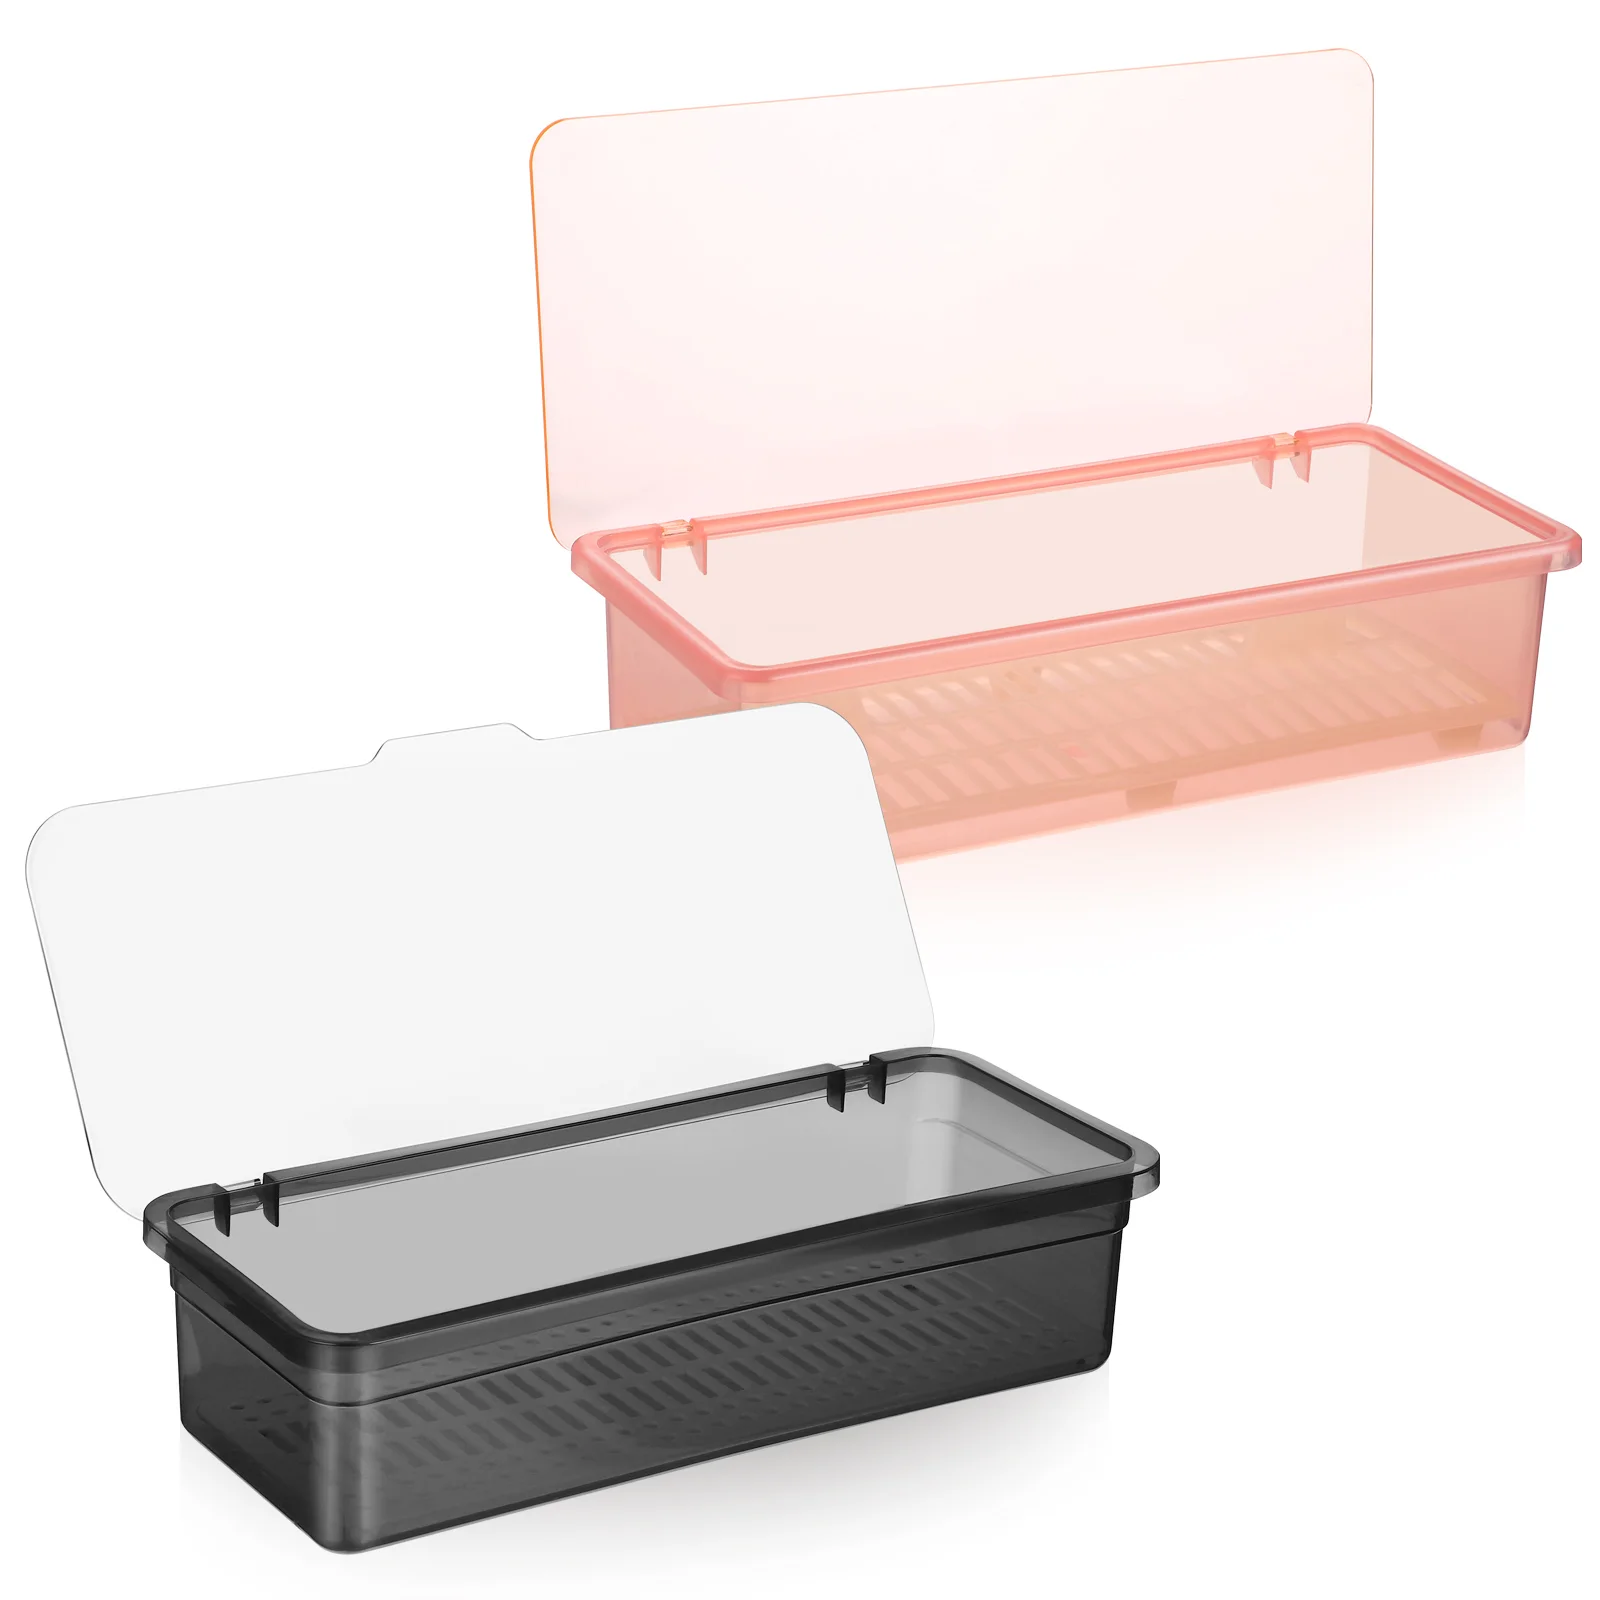 

2 Pcs Flatware Trays with Lid Kitchen Cutlery Organizer Drainer Boxes Plastic Utensil Storage Containers Silverware Dinnerware